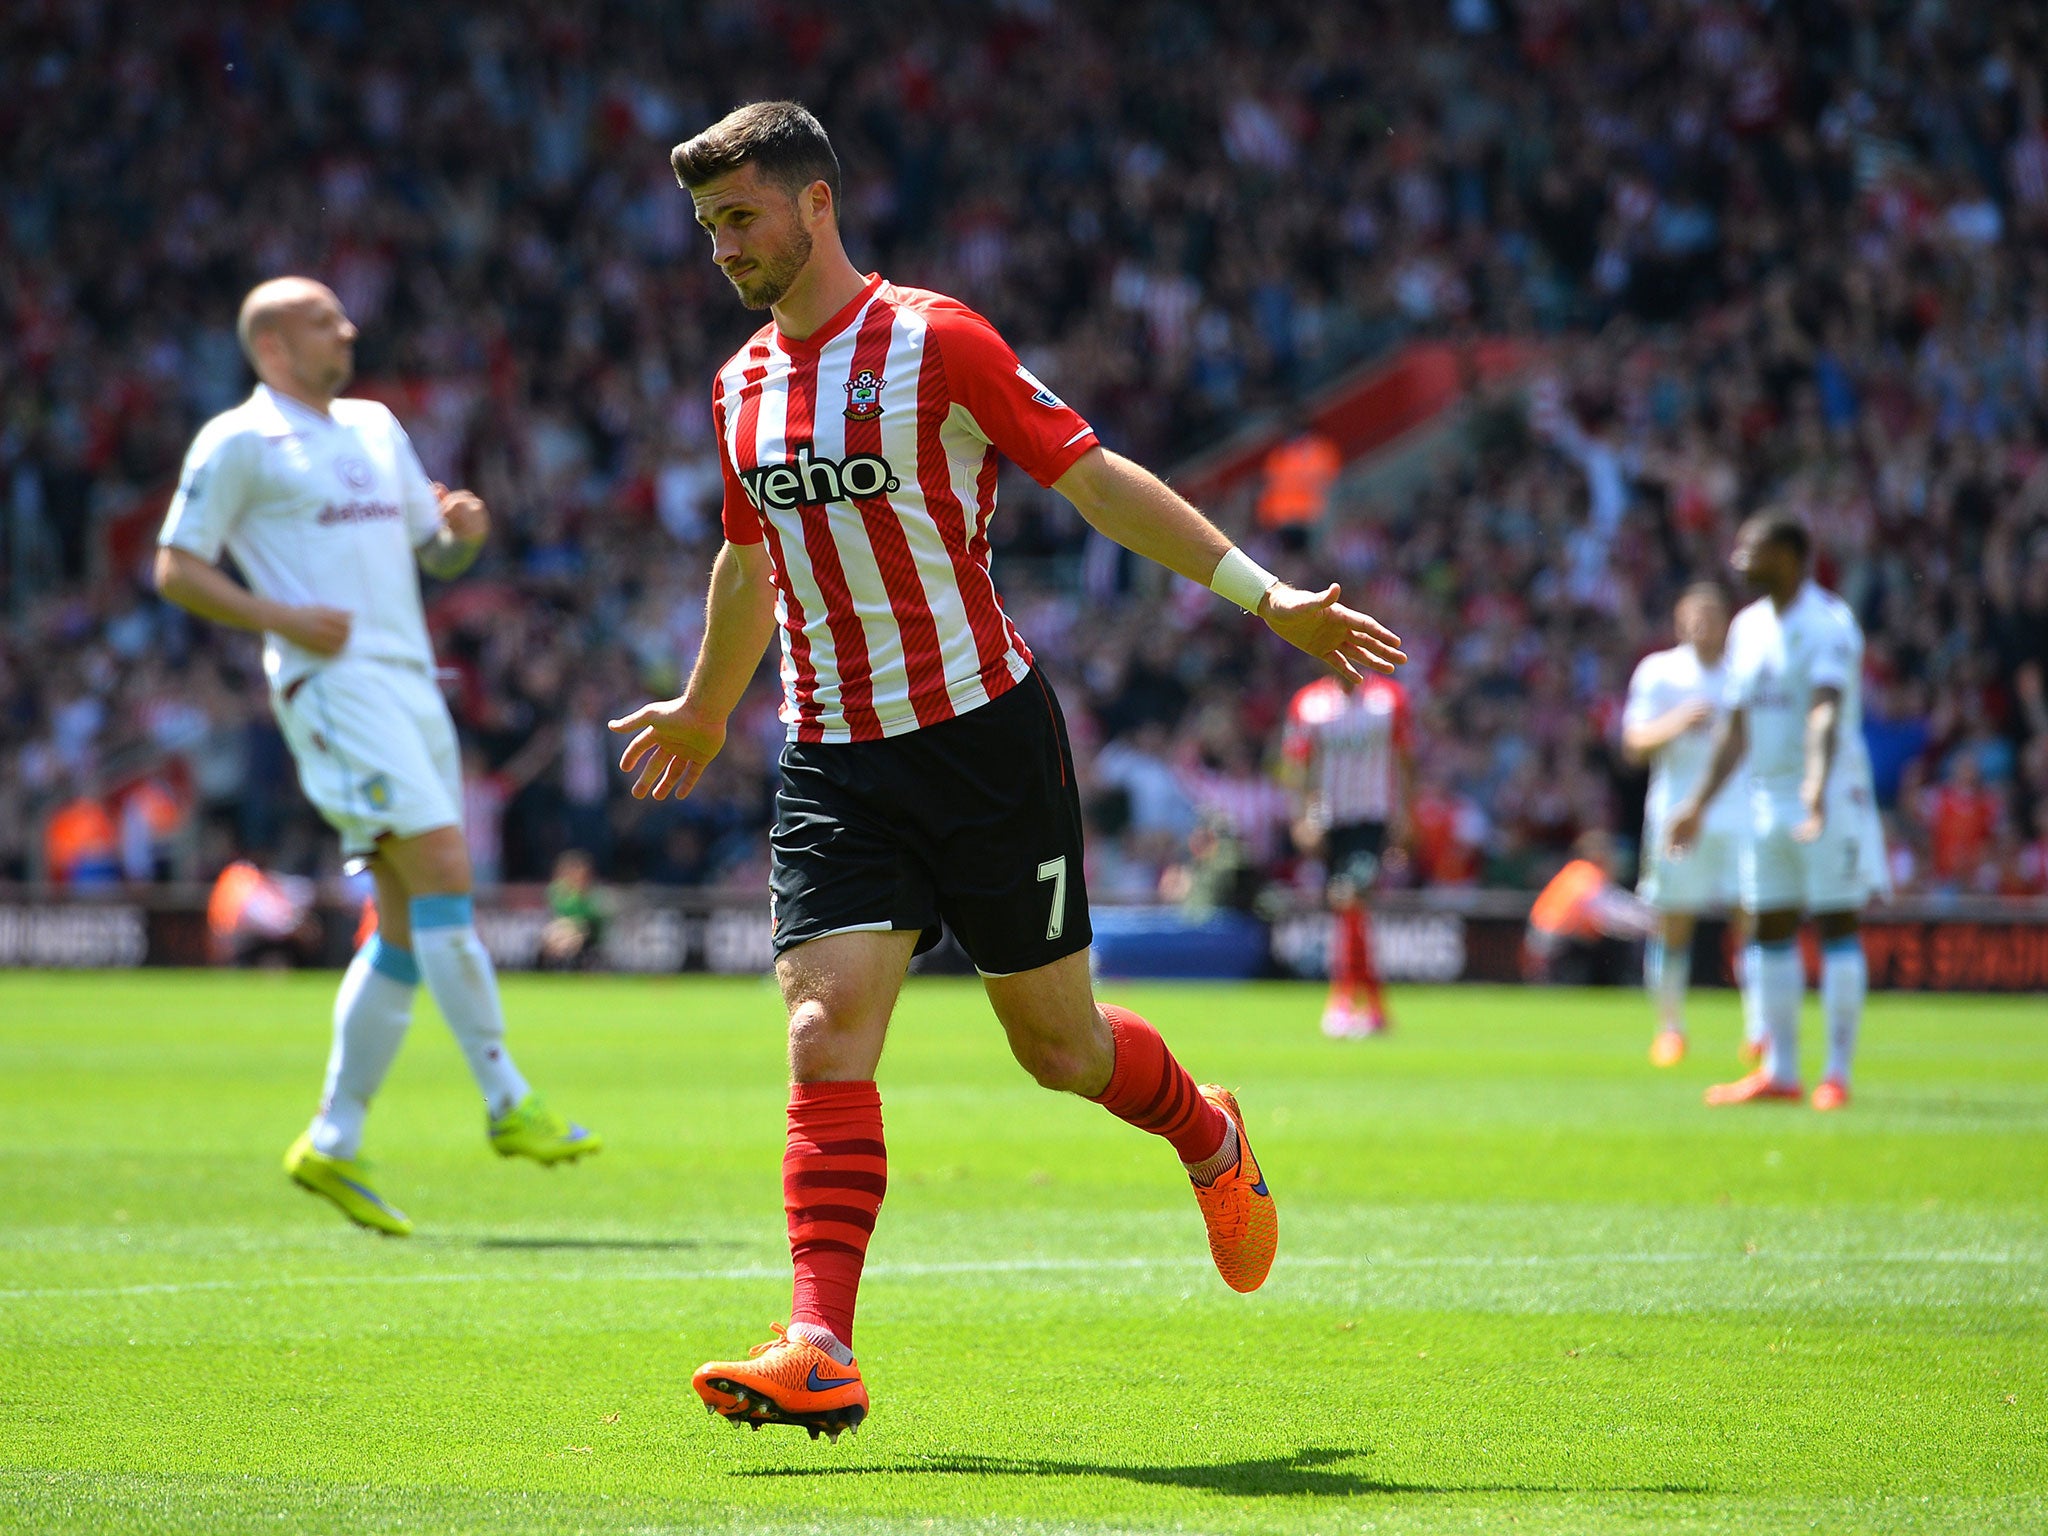 Shane Long added a fourth for Southampton